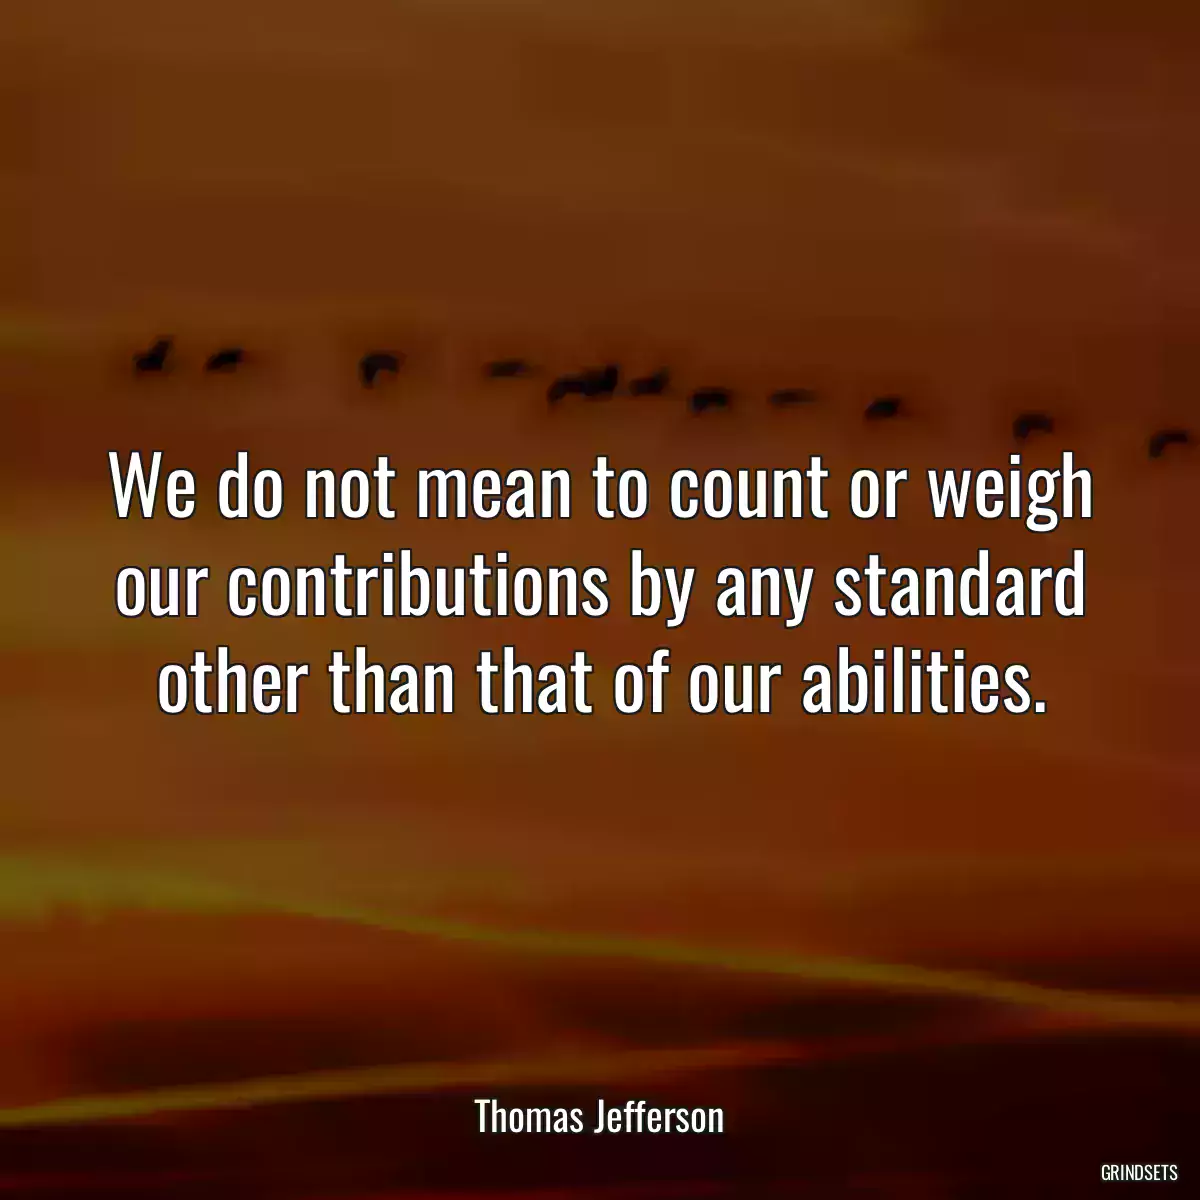 We do not mean to count or weigh our contributions by any standard other than that of our abilities.